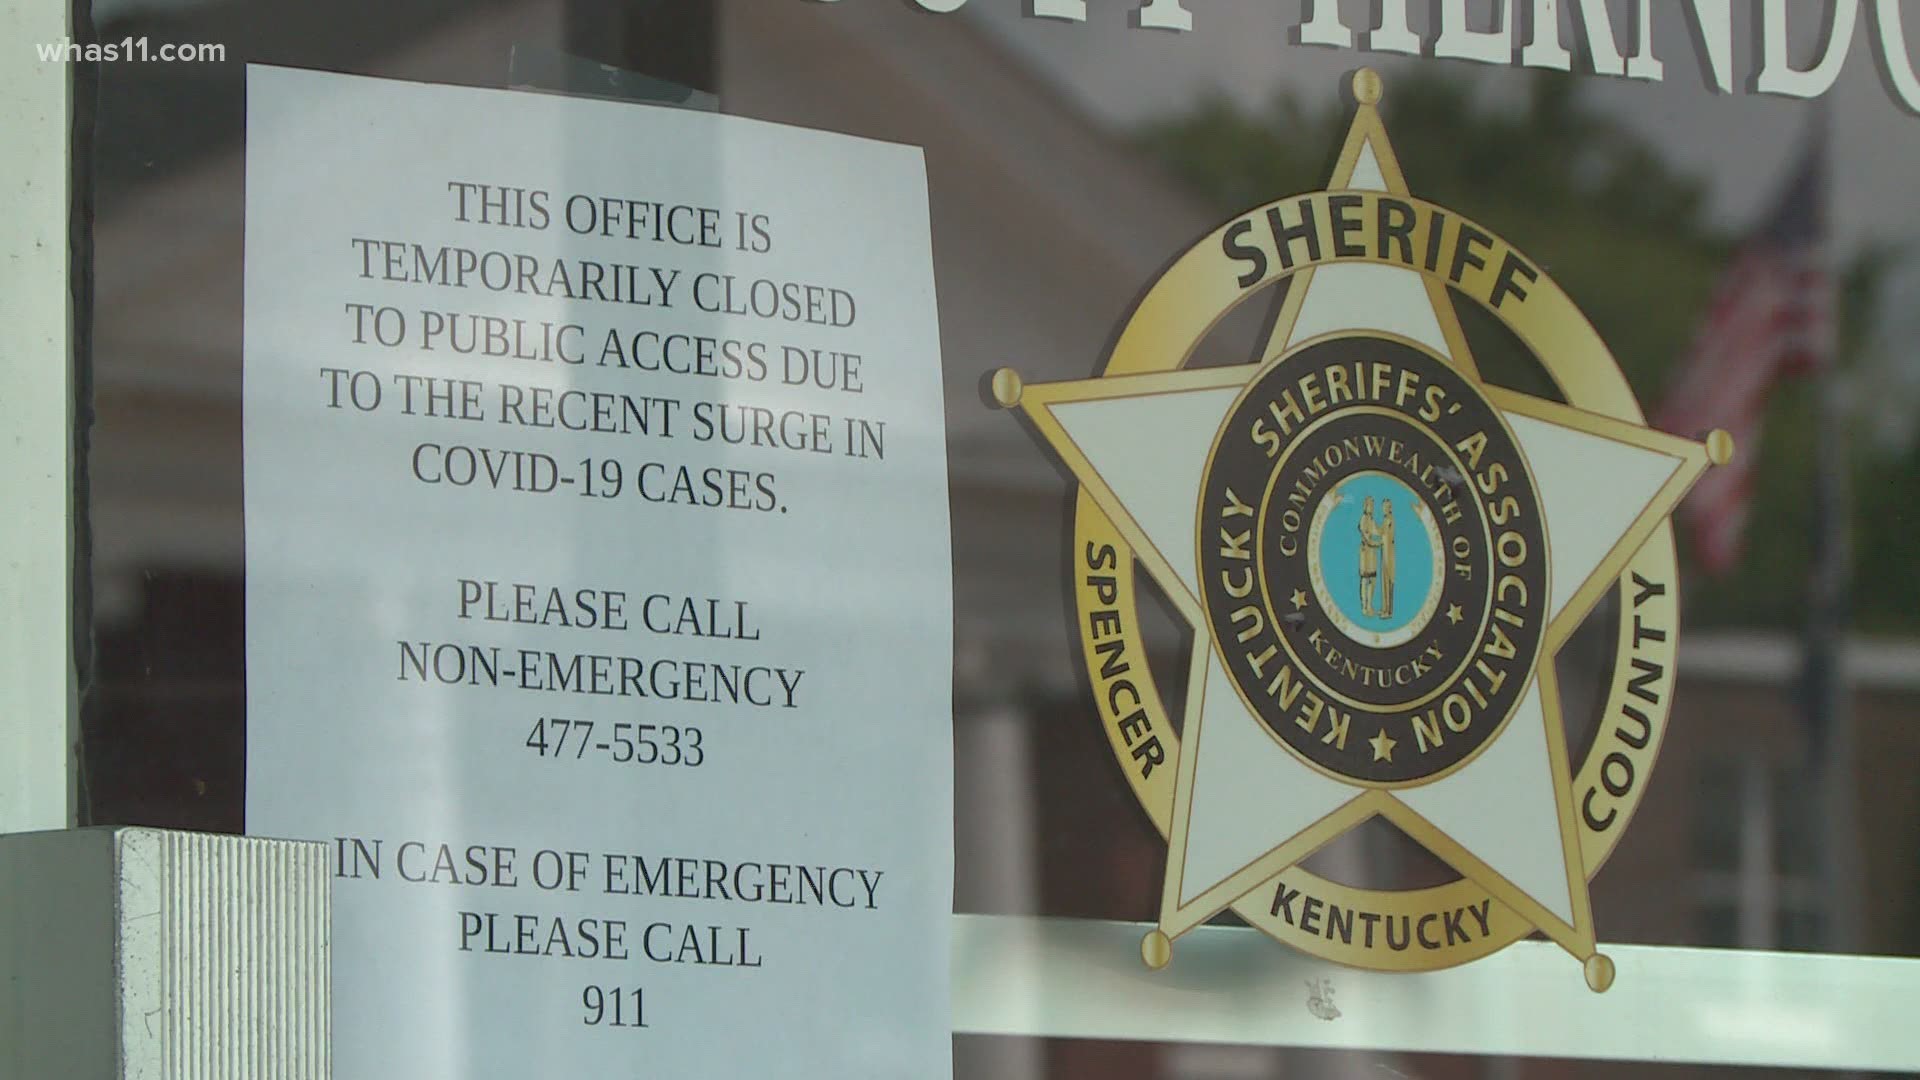 After a few people tested positive at the Spencer County Sheriff's Office, they had to close their doors to public access temporarily.